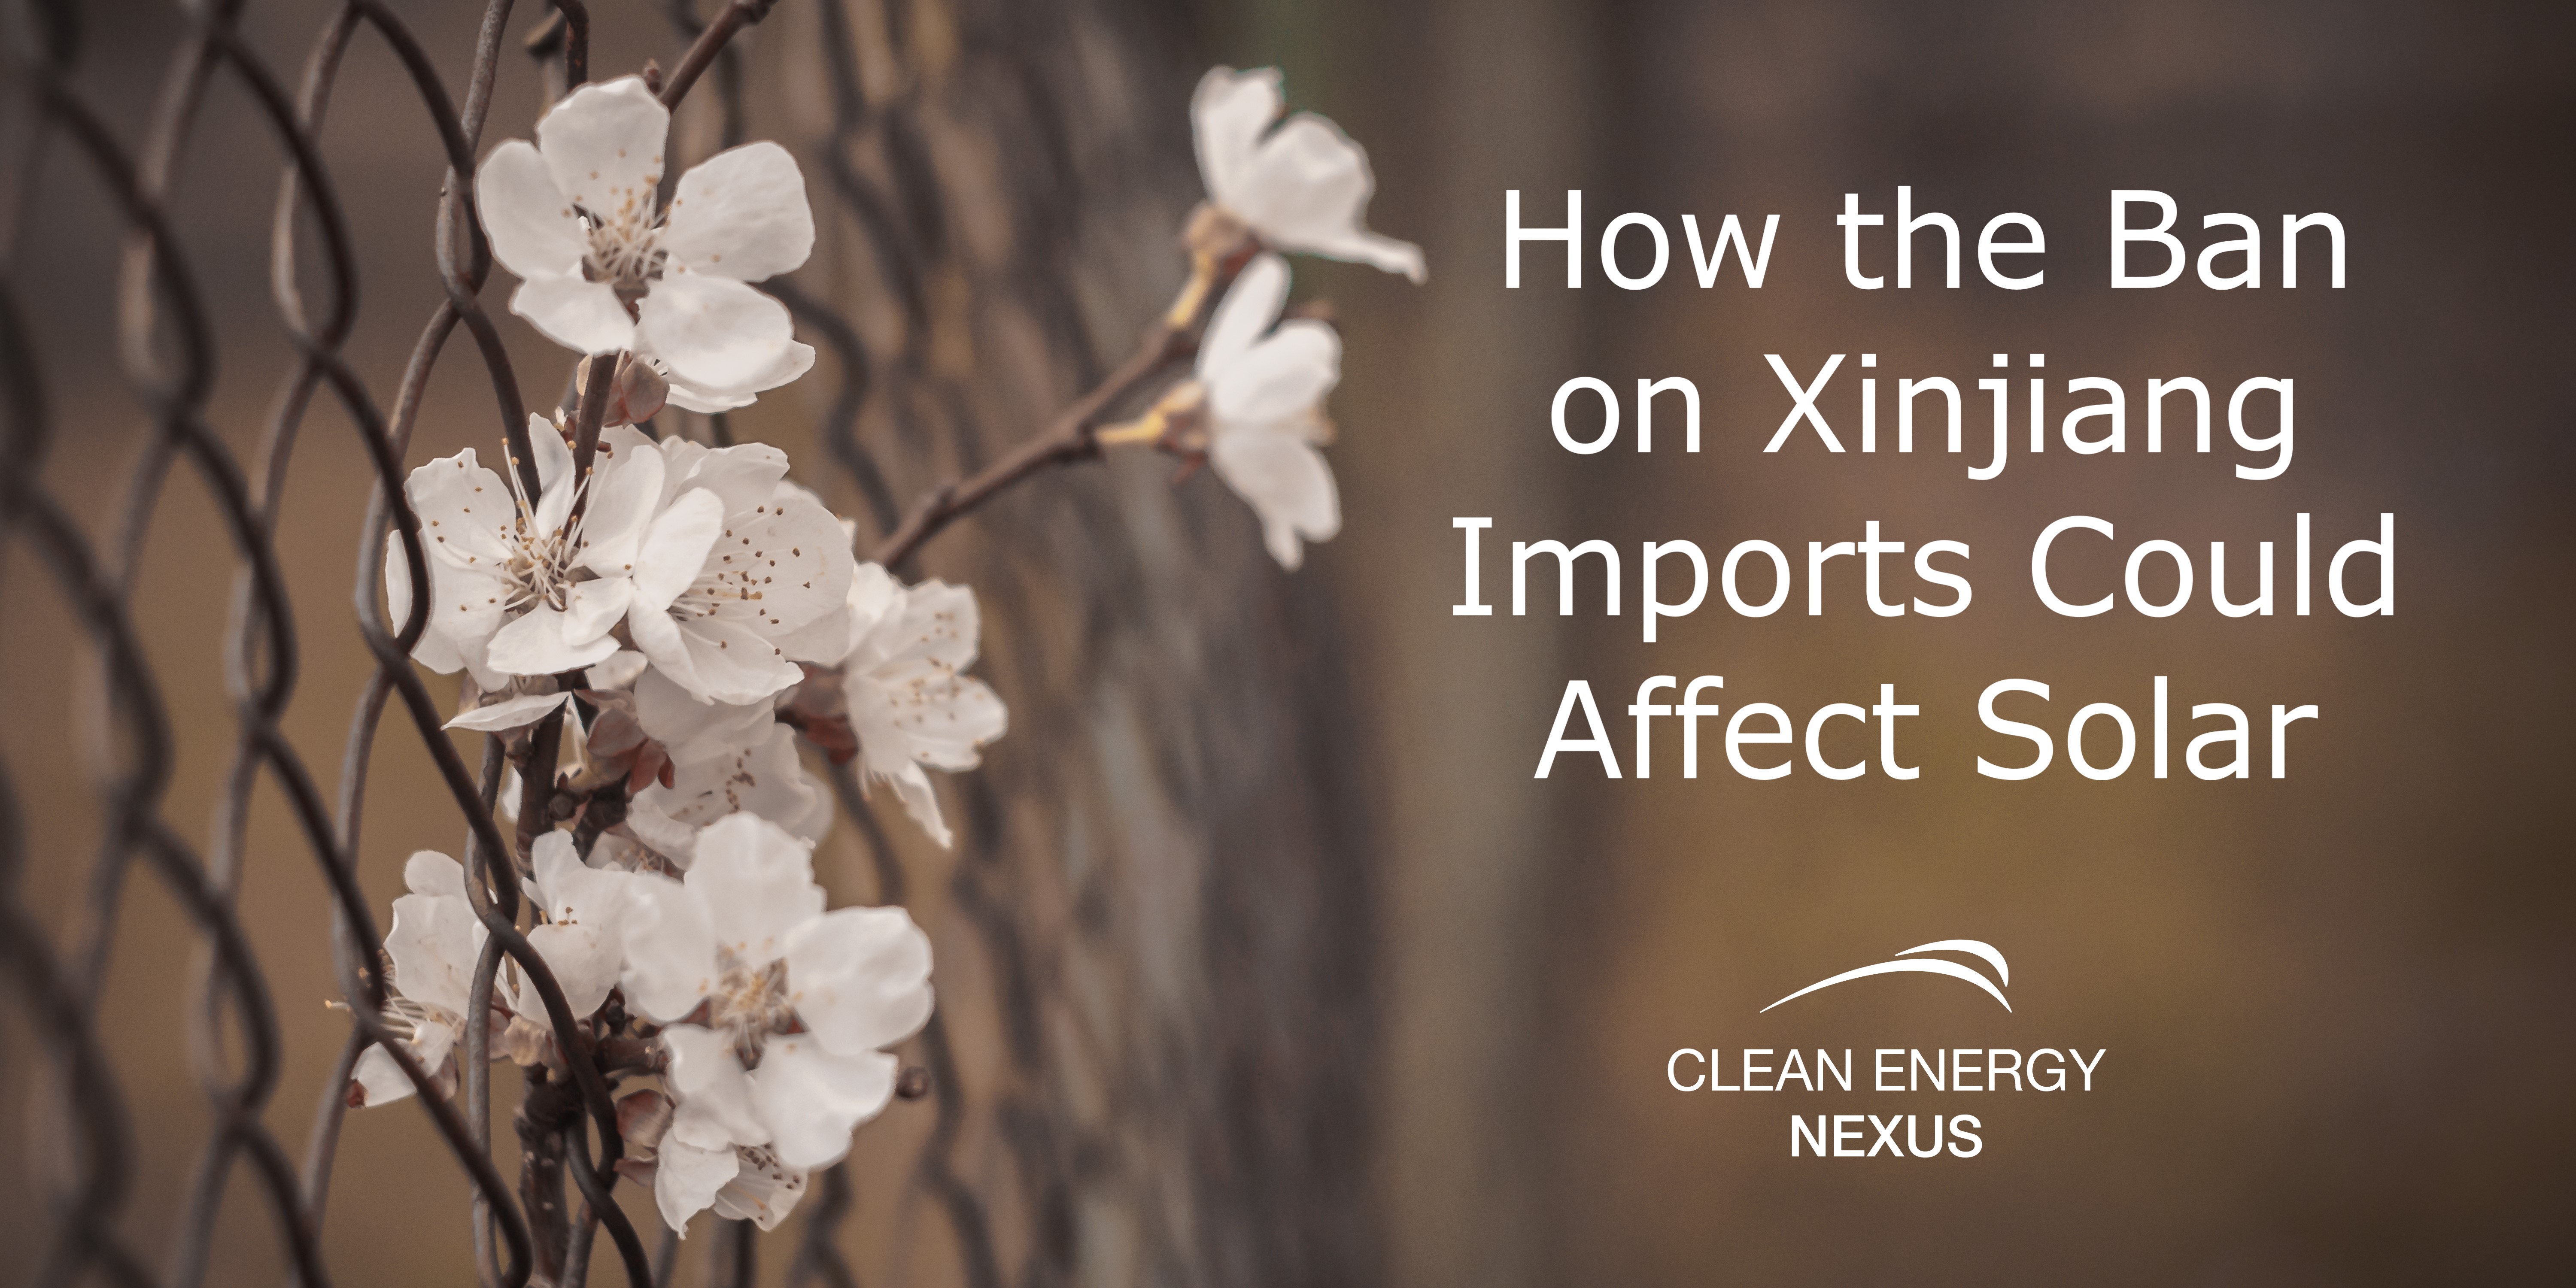 How the Ban on Xinjiang Imports Could Affect Solar